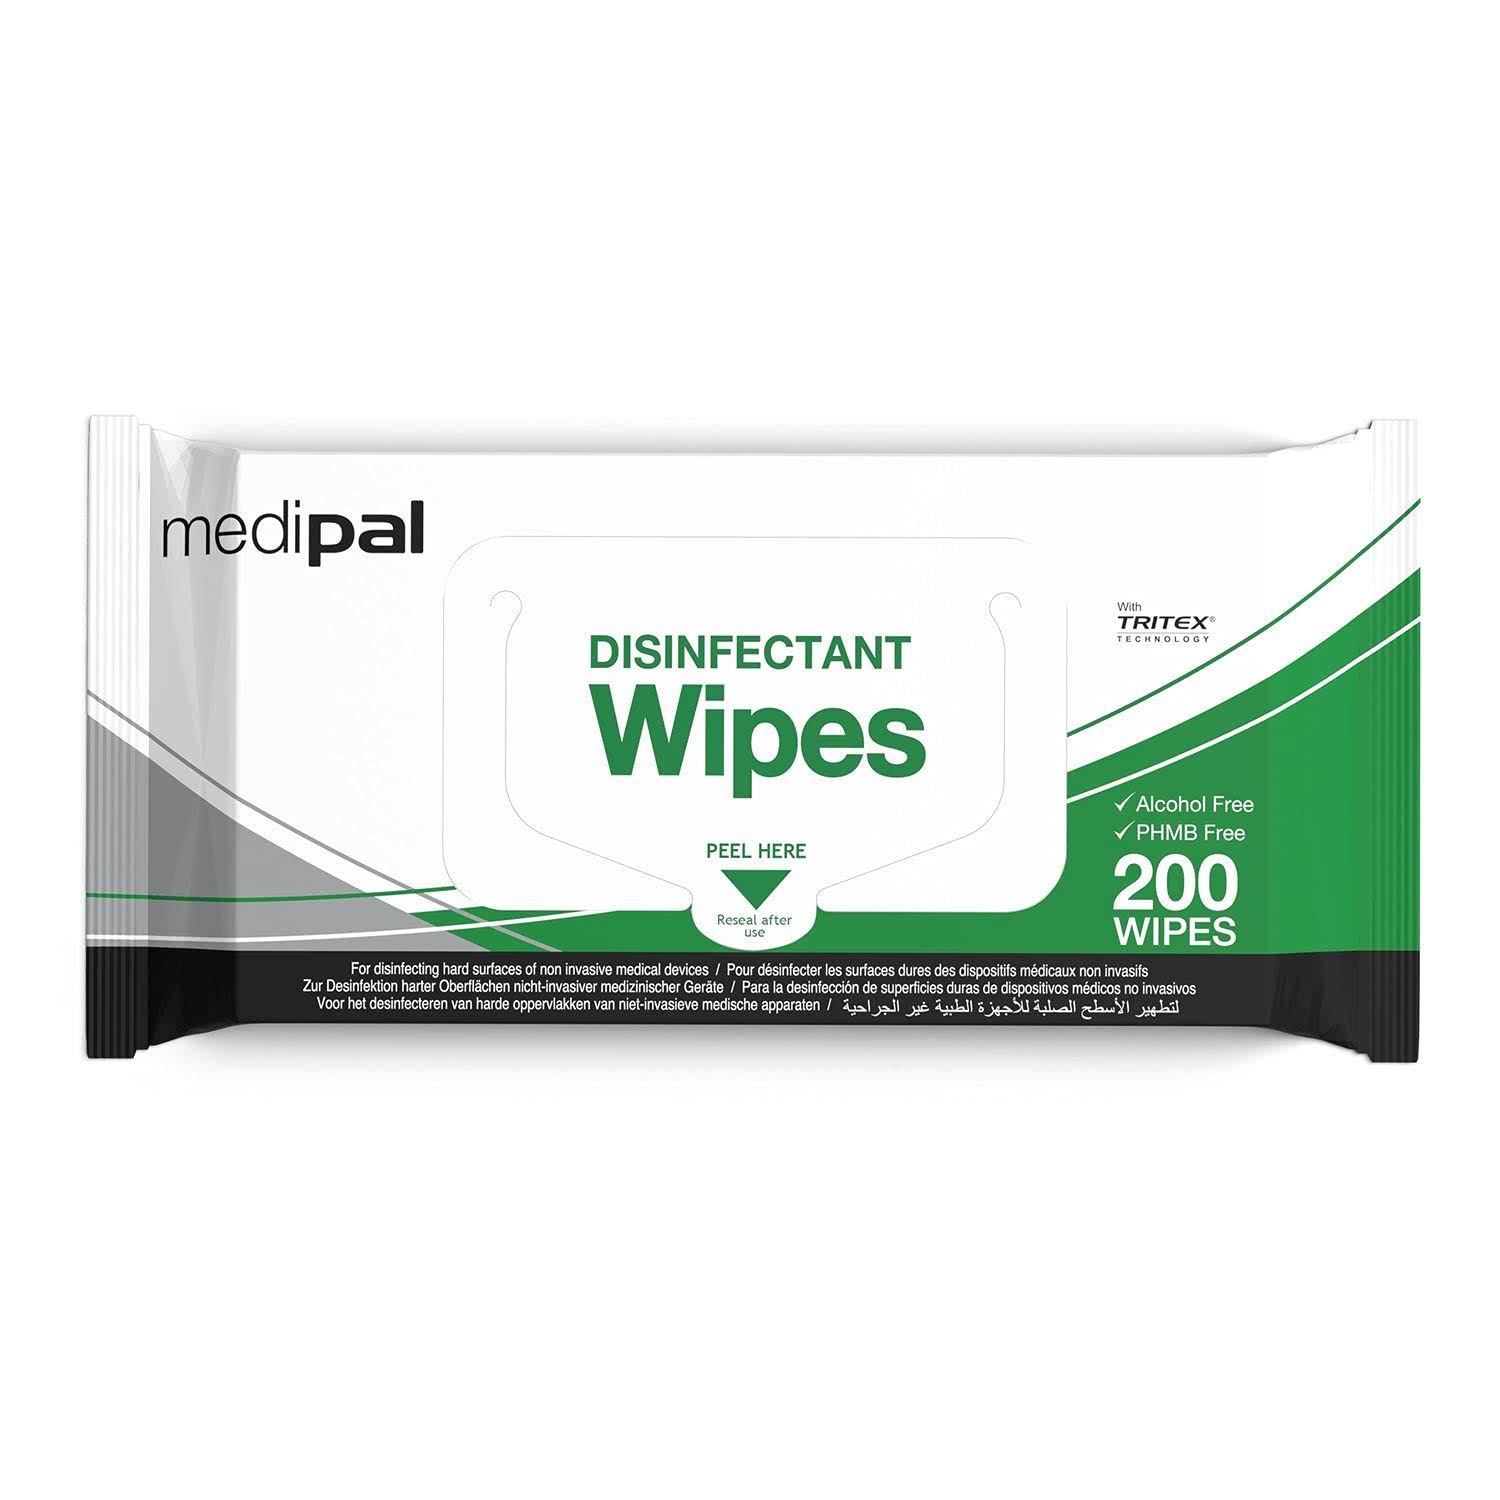 Medipal Disinfectant Wipes - Pack of 200 Wipes - 200 Wipes